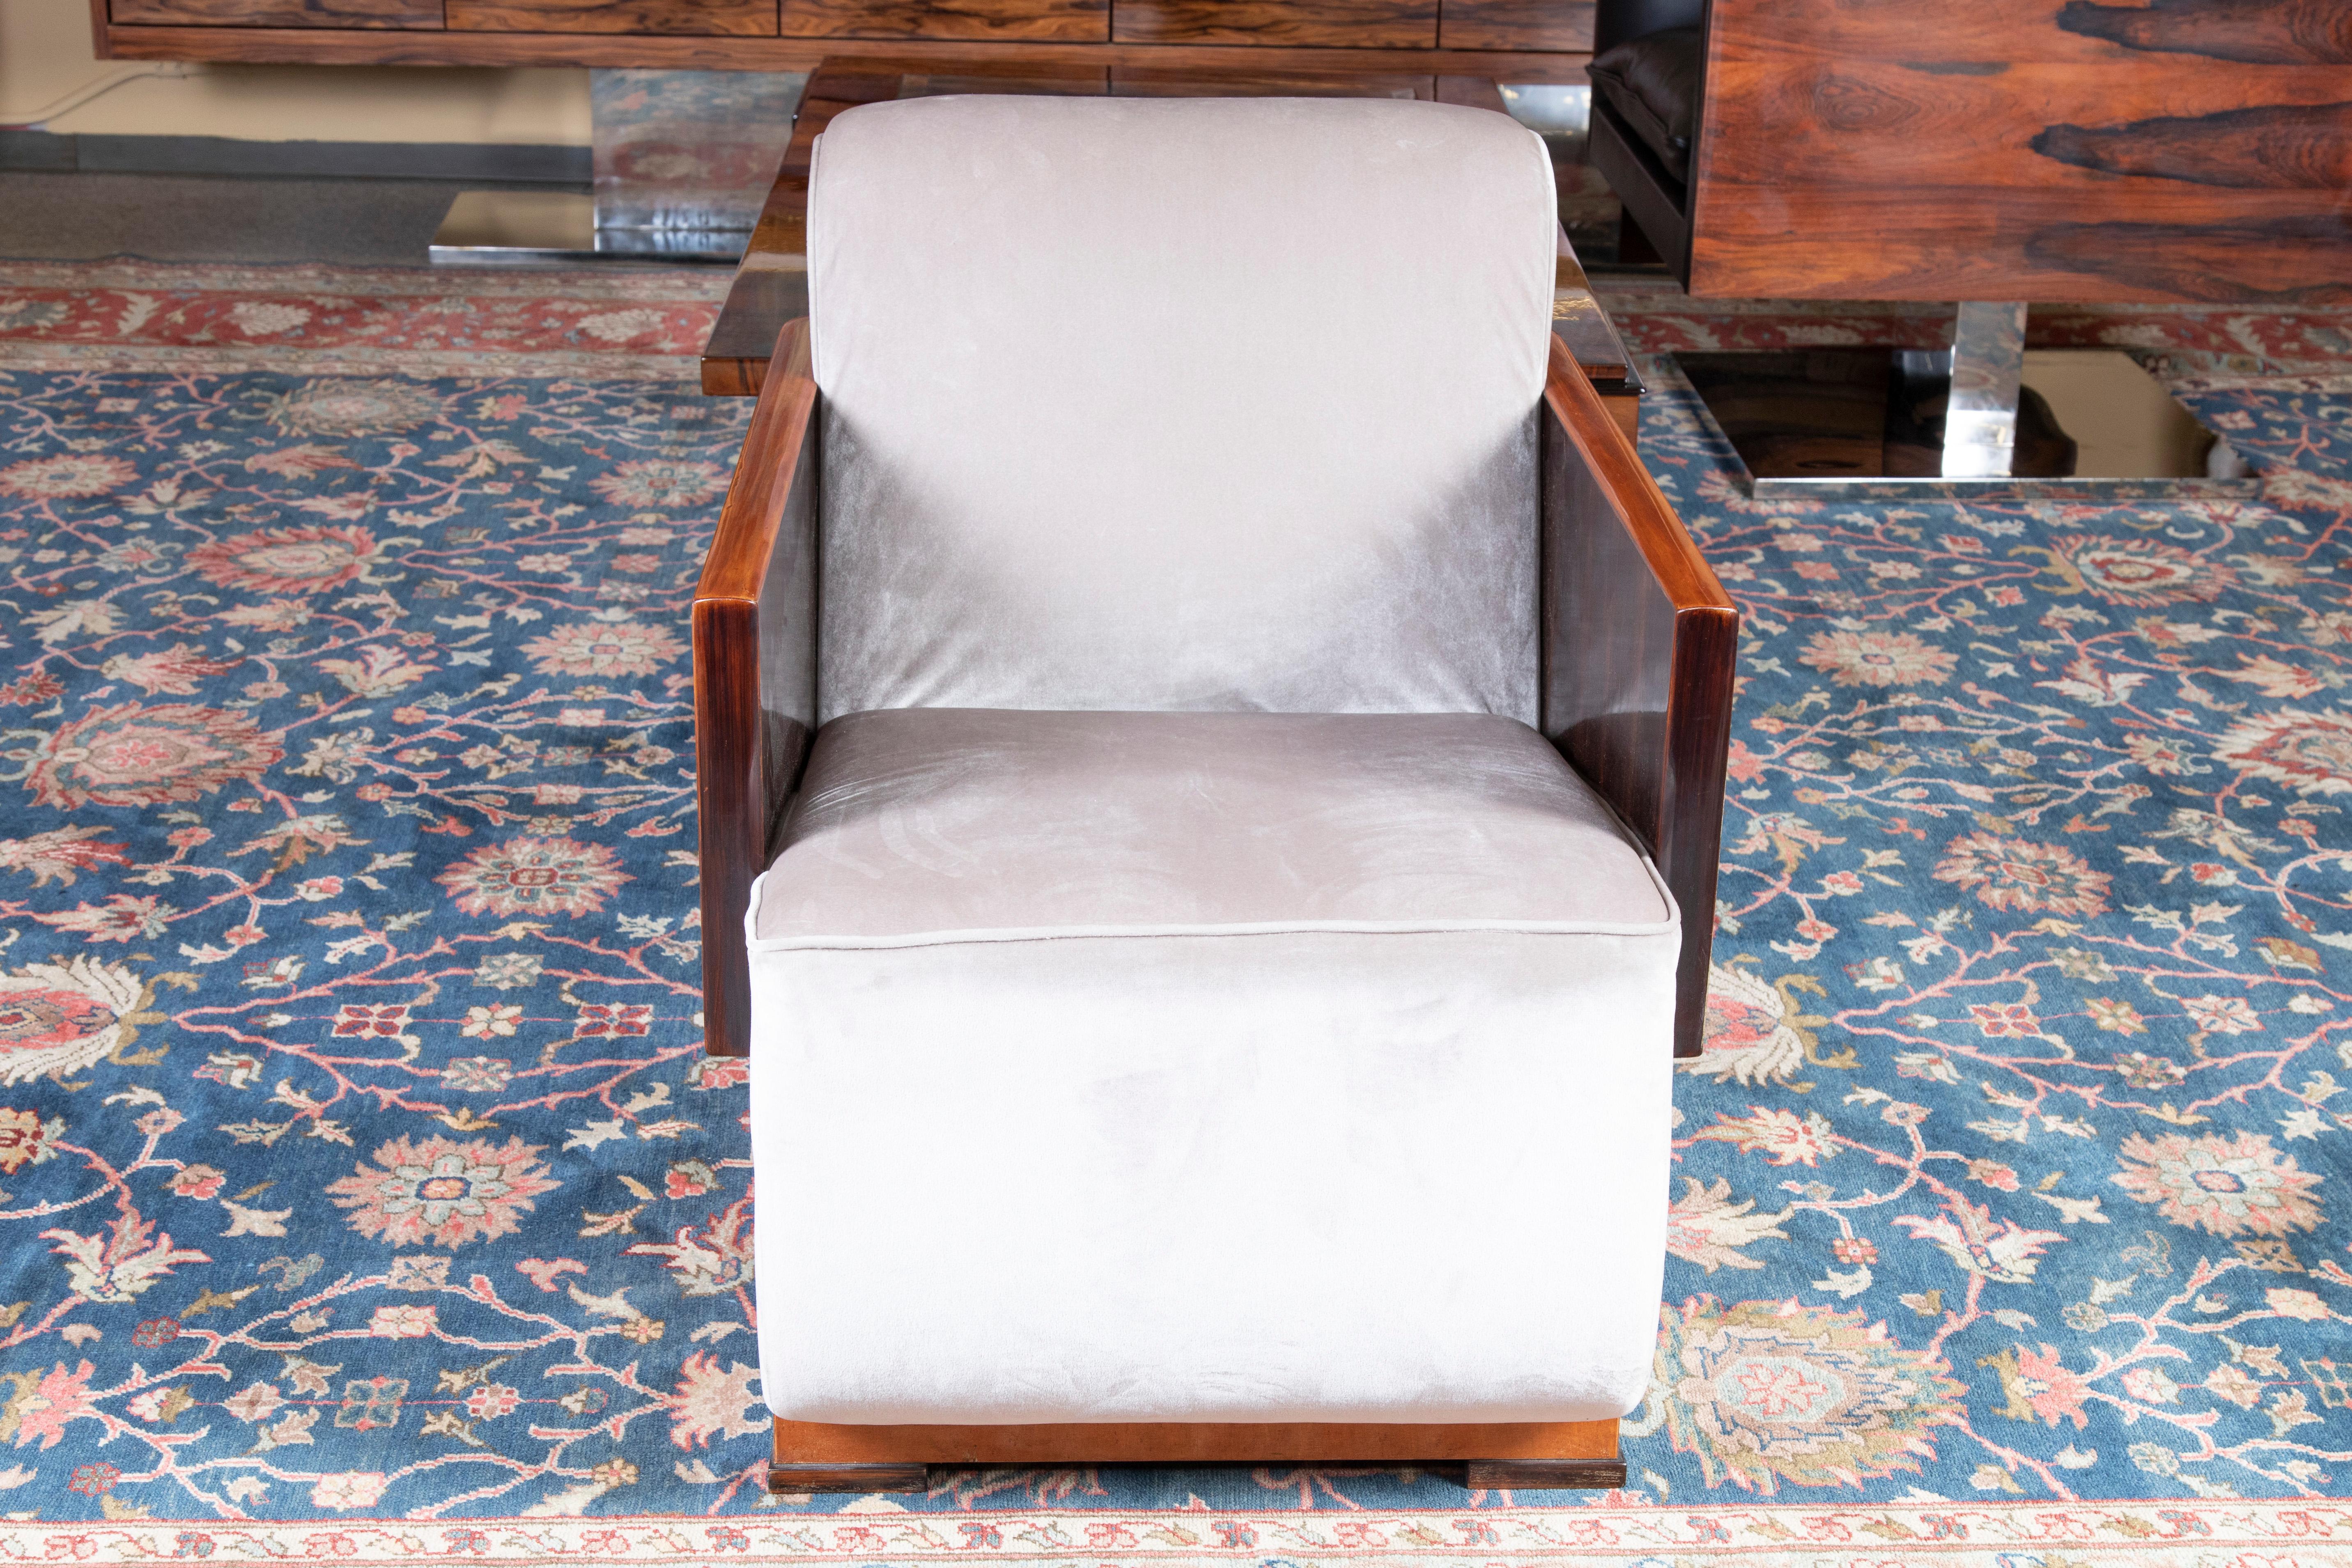 Armchairs are made out of walnut wood and re-upholstered in a light velvety fabric. Arms of the chair is made out of solid piece of wood. On the side beautiful woodgrain is visible. Chair rests on the 4 square wooden legs. 
Back of the chair is